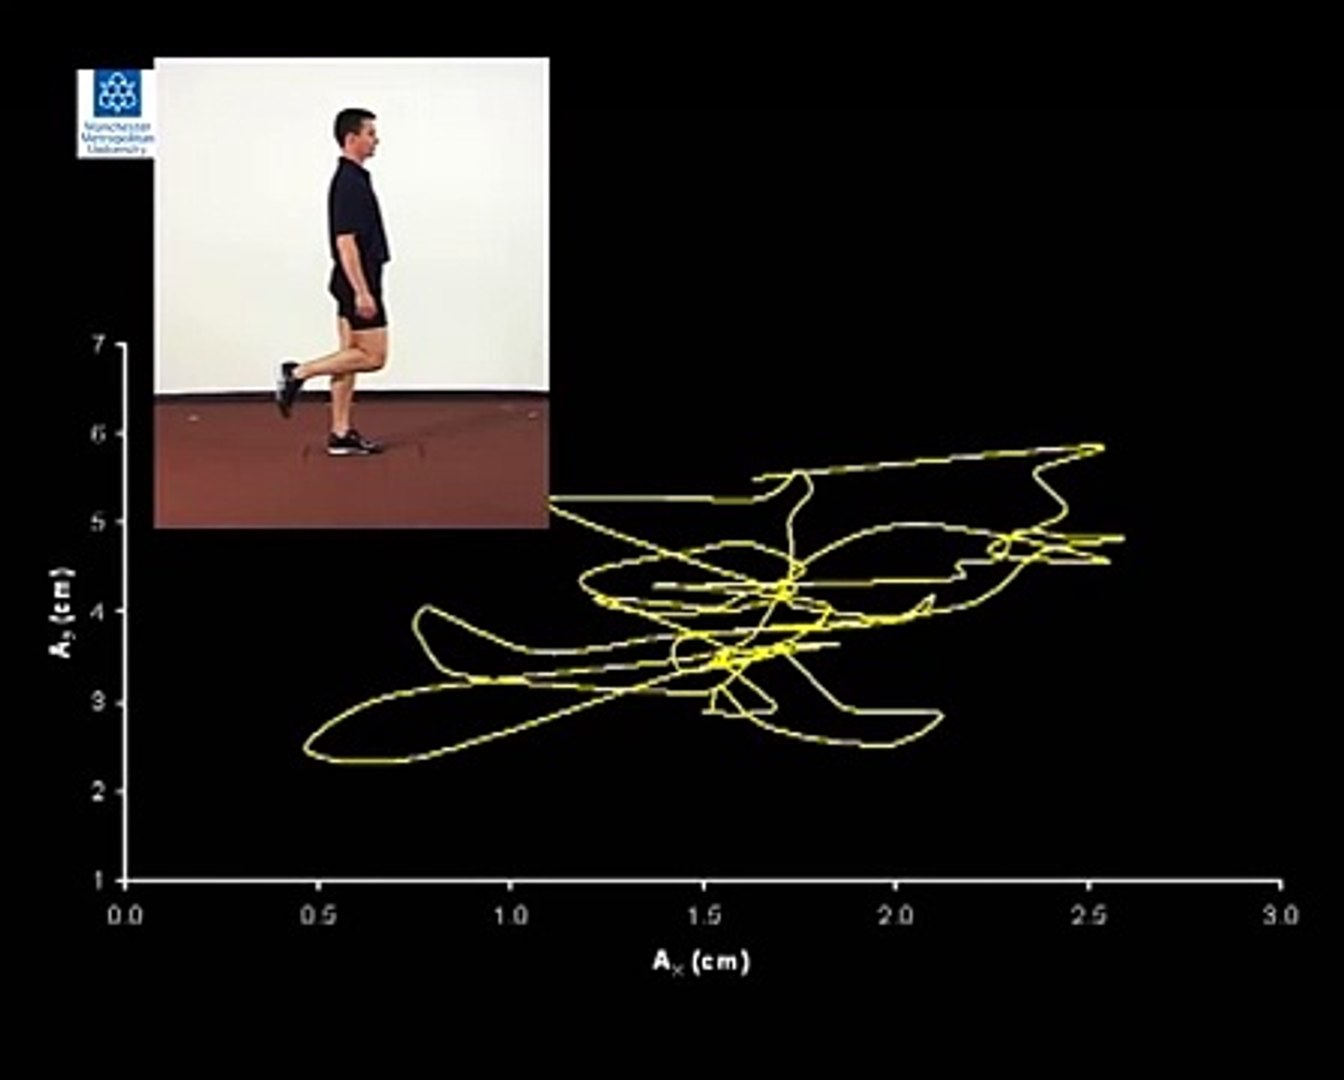 CoP & Free Moment - Force Plates in Sport & Exercise